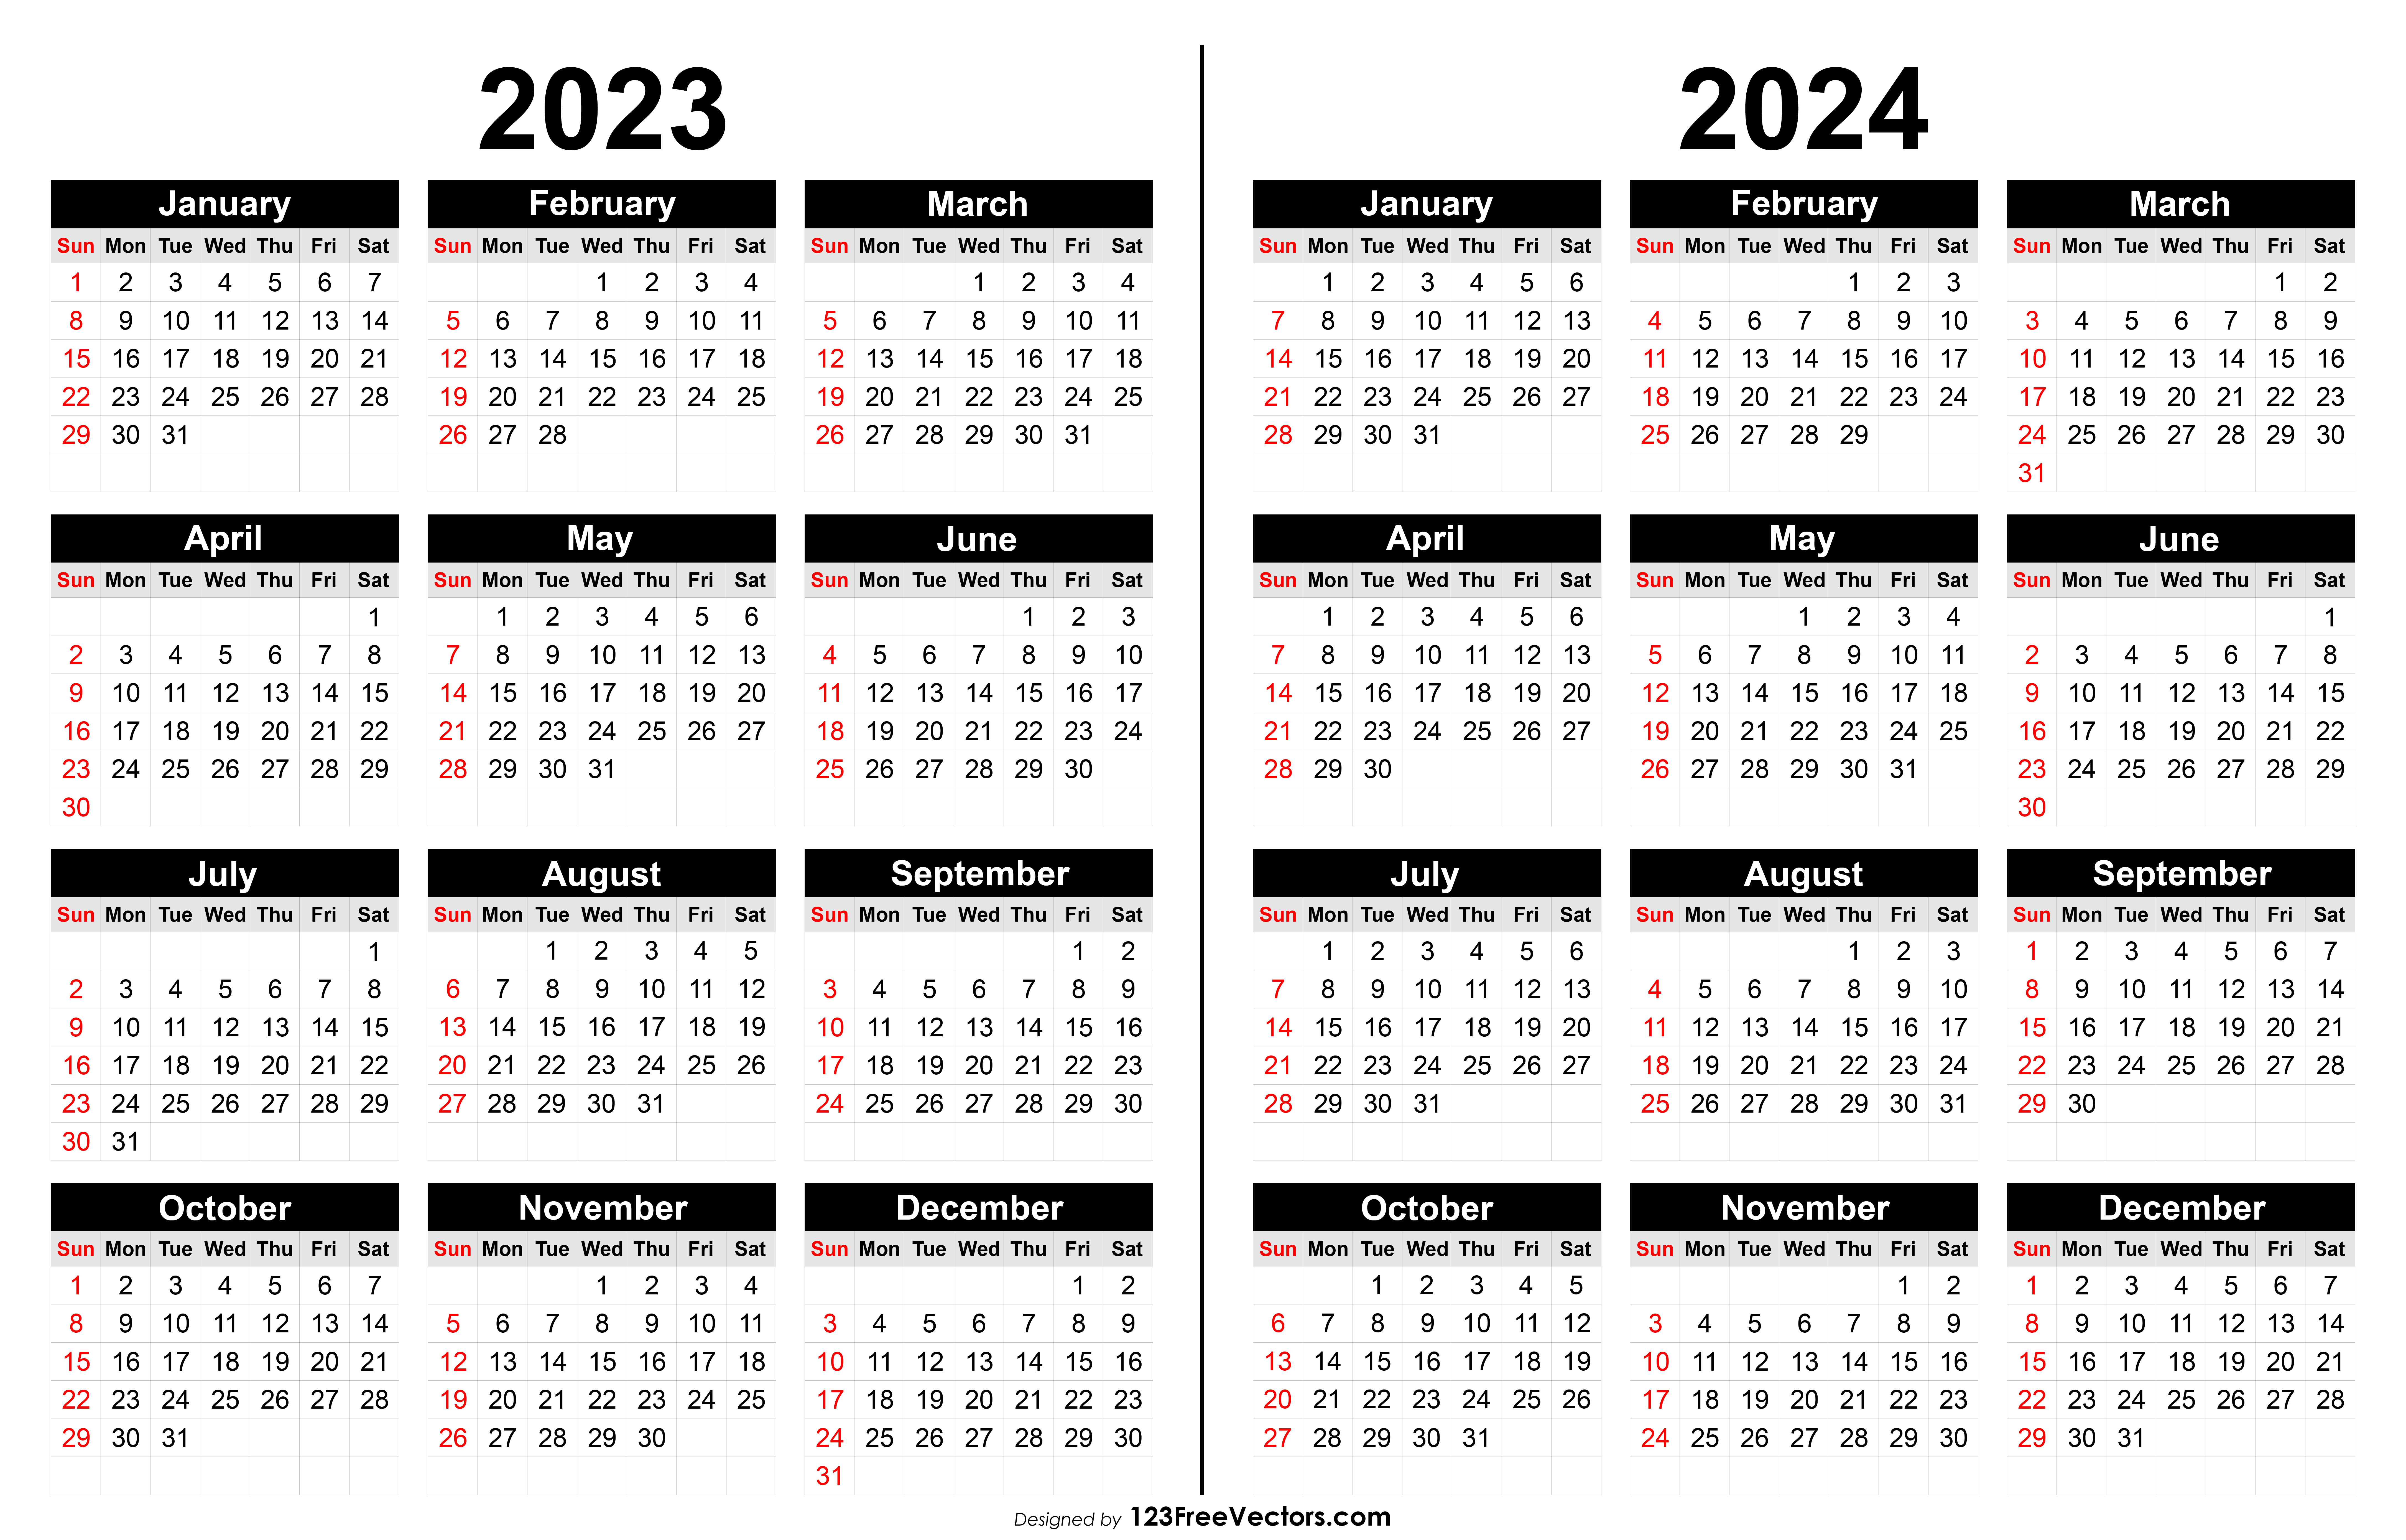 Free 2023 And 2024 Calendar Printable | Yearly Calendar 2023 And 2024